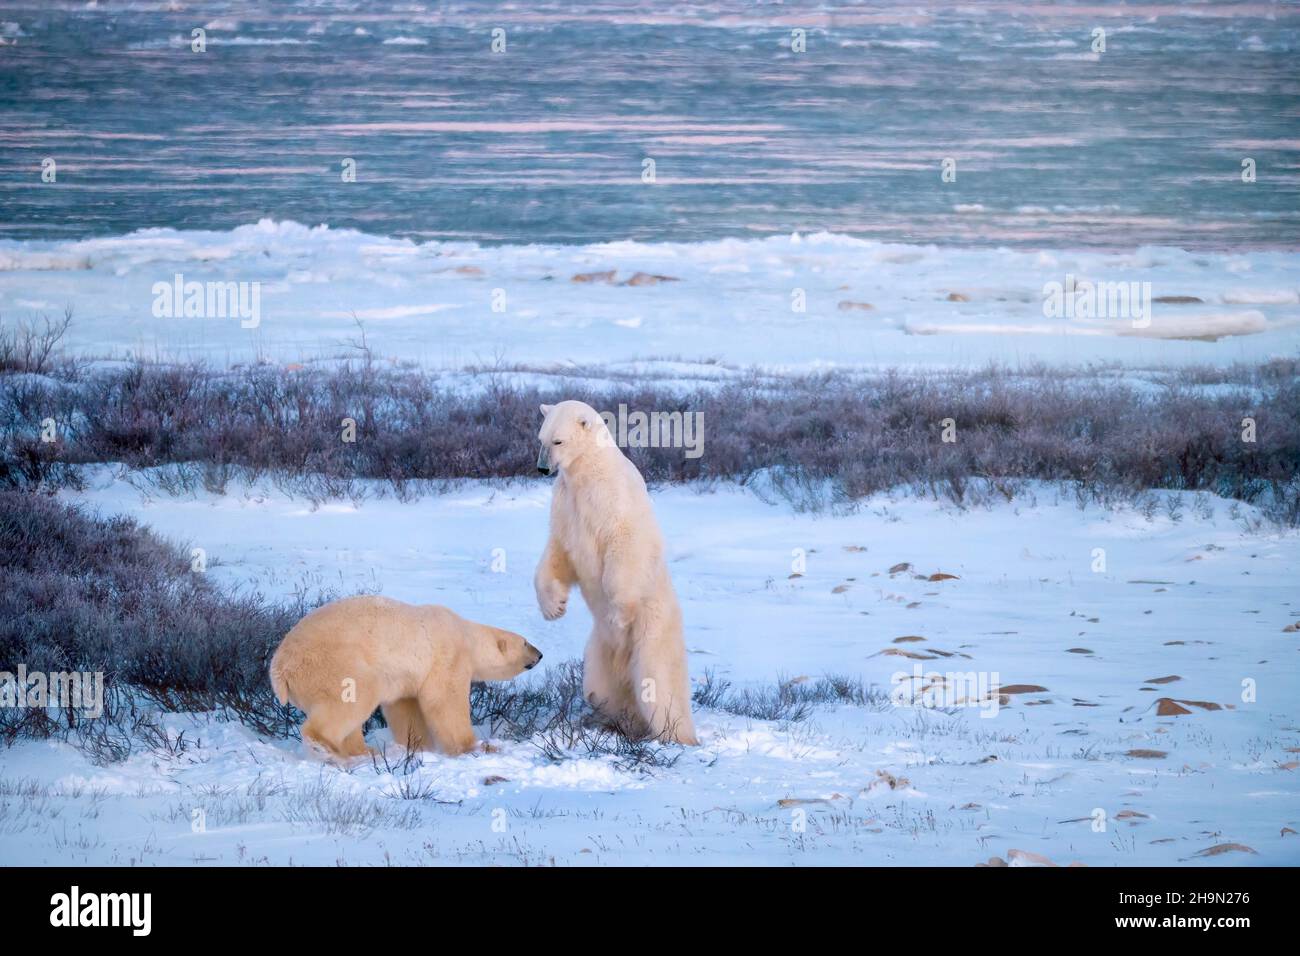 Two adult polar bears (Ursus maritimus) exhibiting dominant and submissive behavior during an interaction beside Hudson Bay, near Churchill, Manitoba, Stock Photo